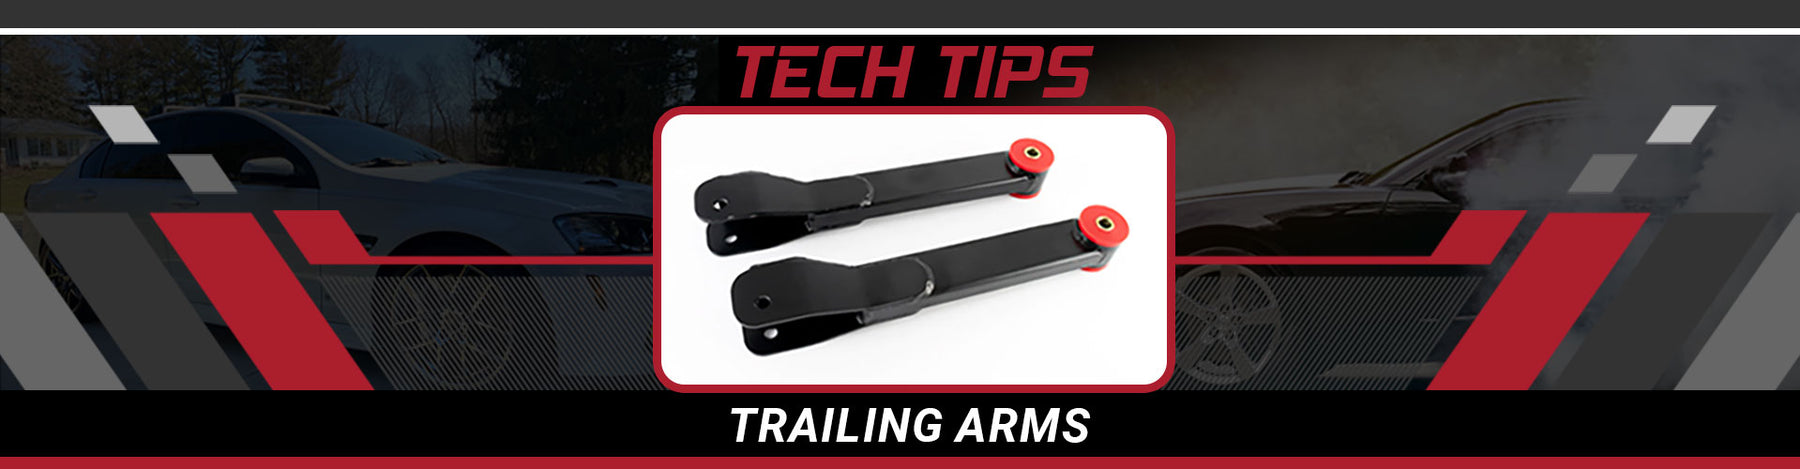 banner for video tech tips for installing trailing arms 